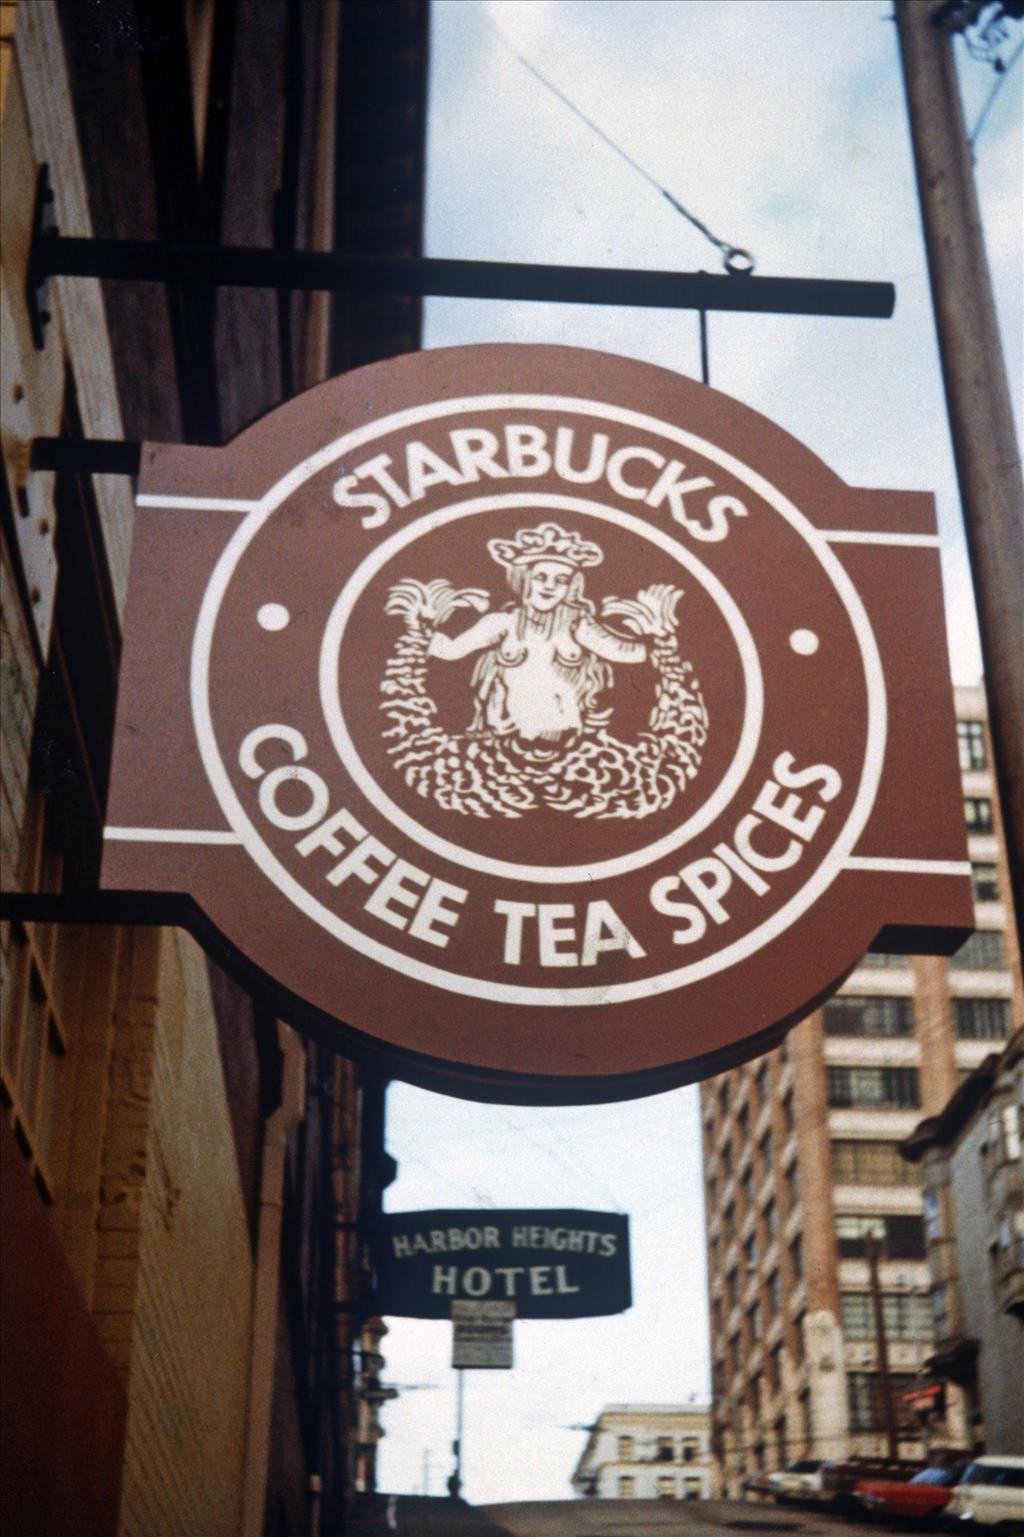 Starbucks: The Early Years - HistoryLink.org